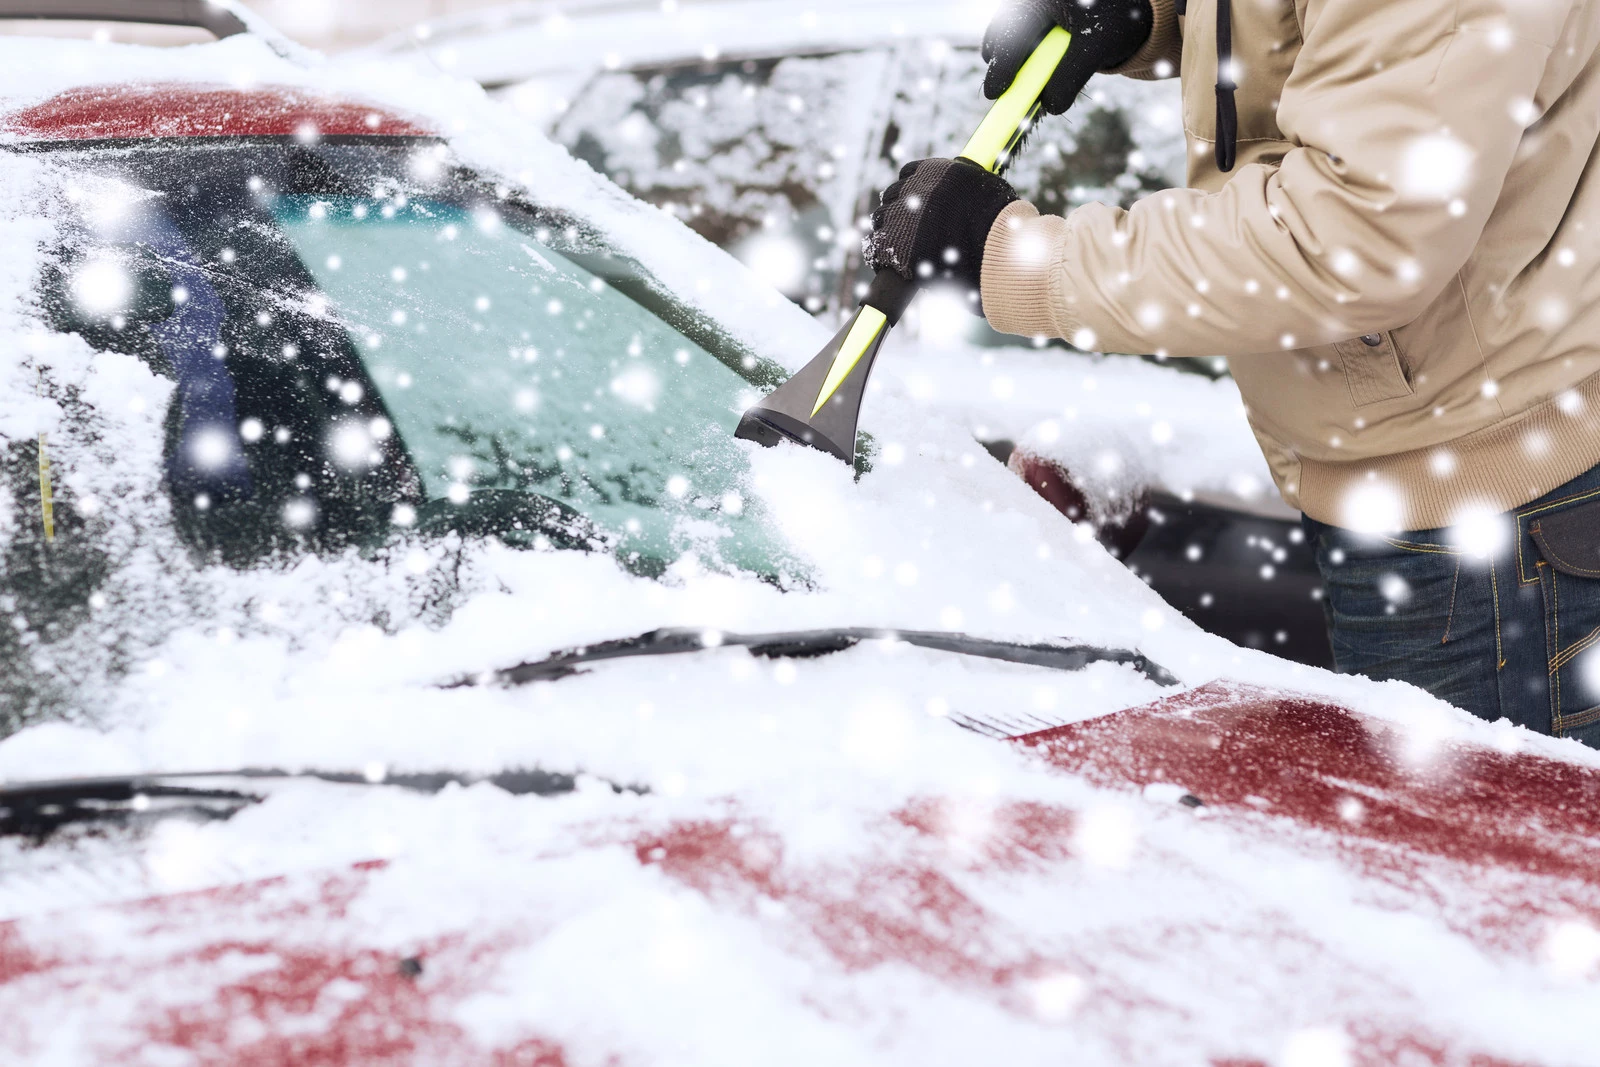 Tips for Removing Ice Safely Off Your Windshield